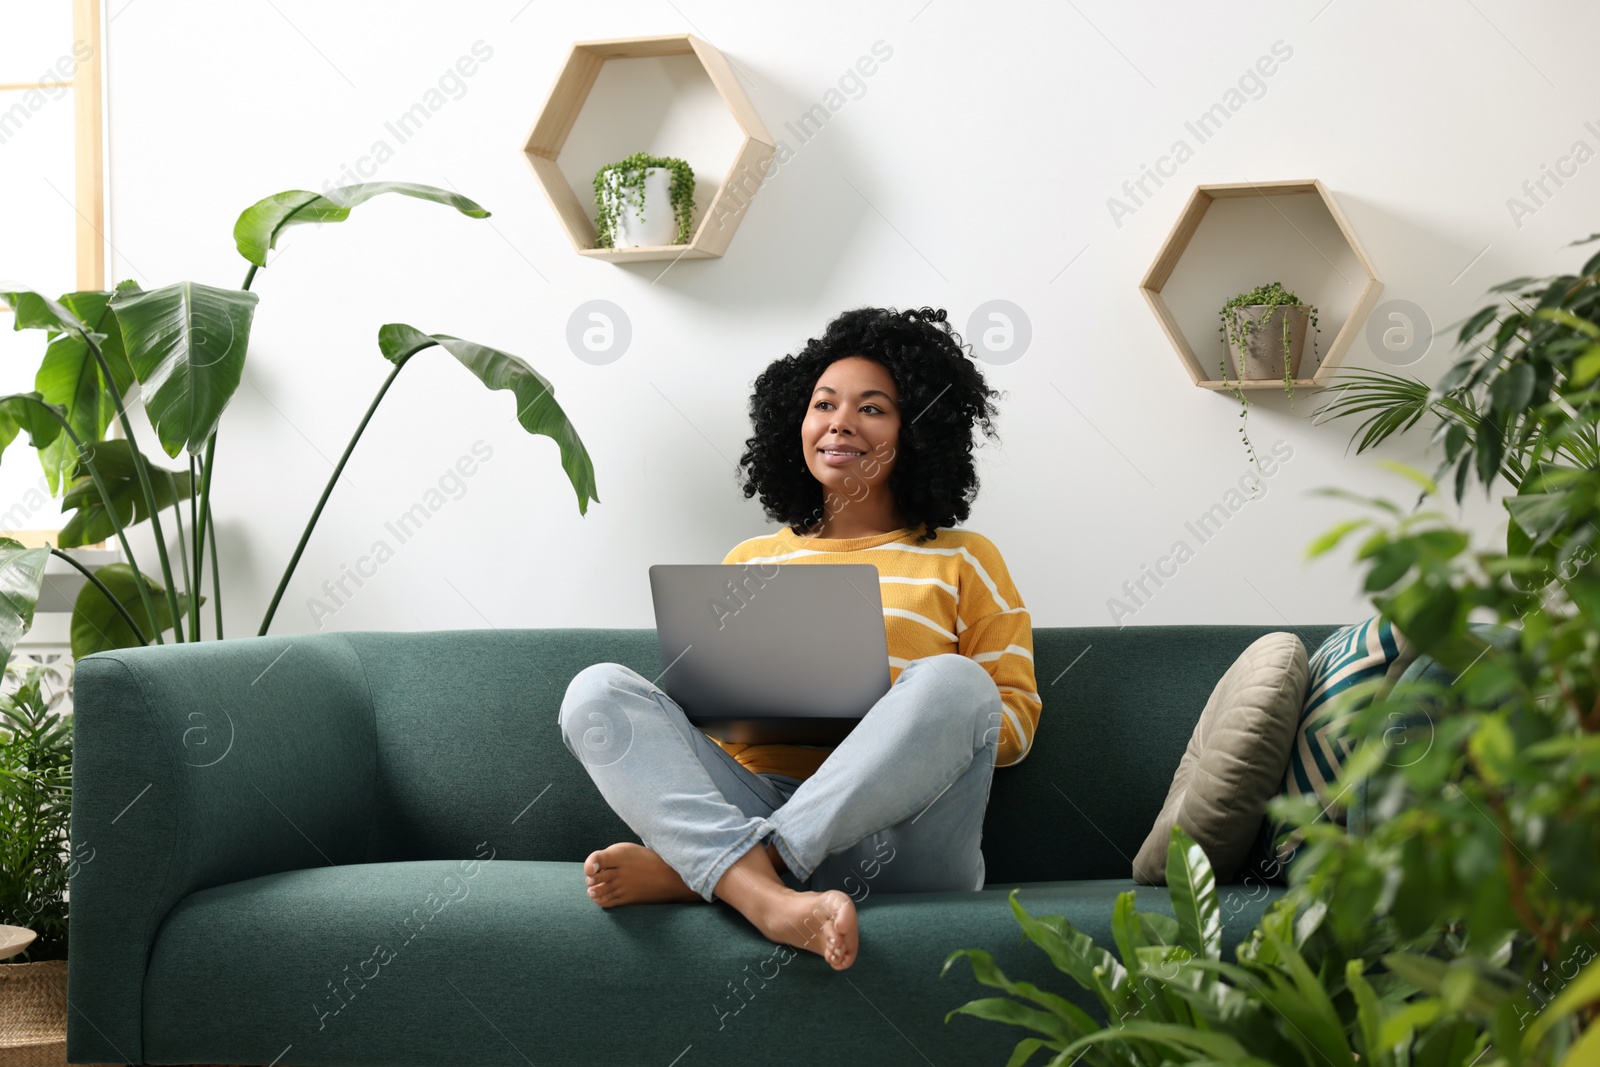 Photo of Relaxing atmosphere. Happy woman with laptop on sofa near beautiful houseplants in room